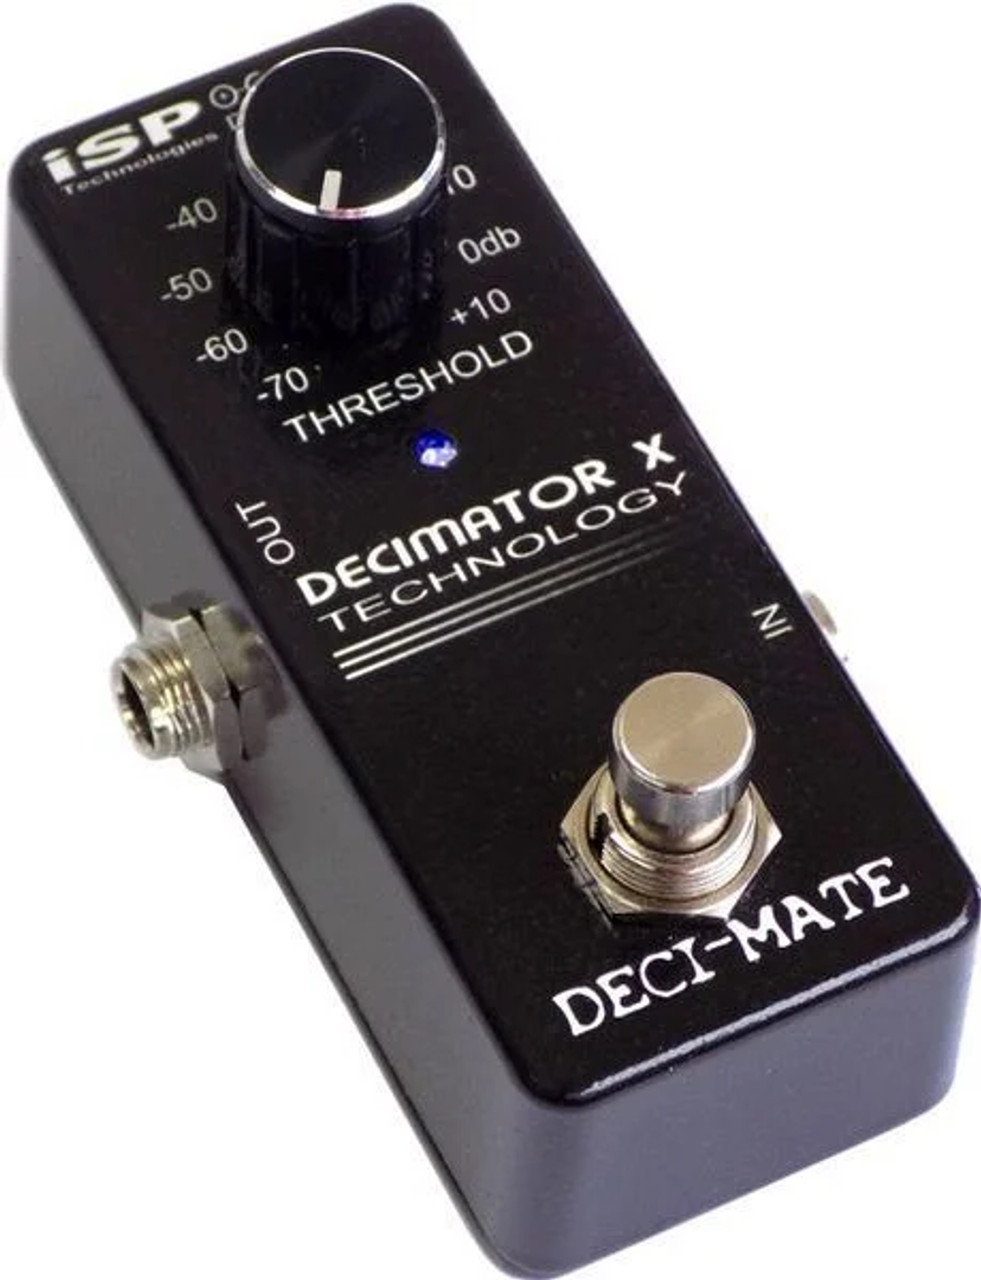 Technologies　ISP　Micro　Reduction　DECI-MATE　Noise　Pedal